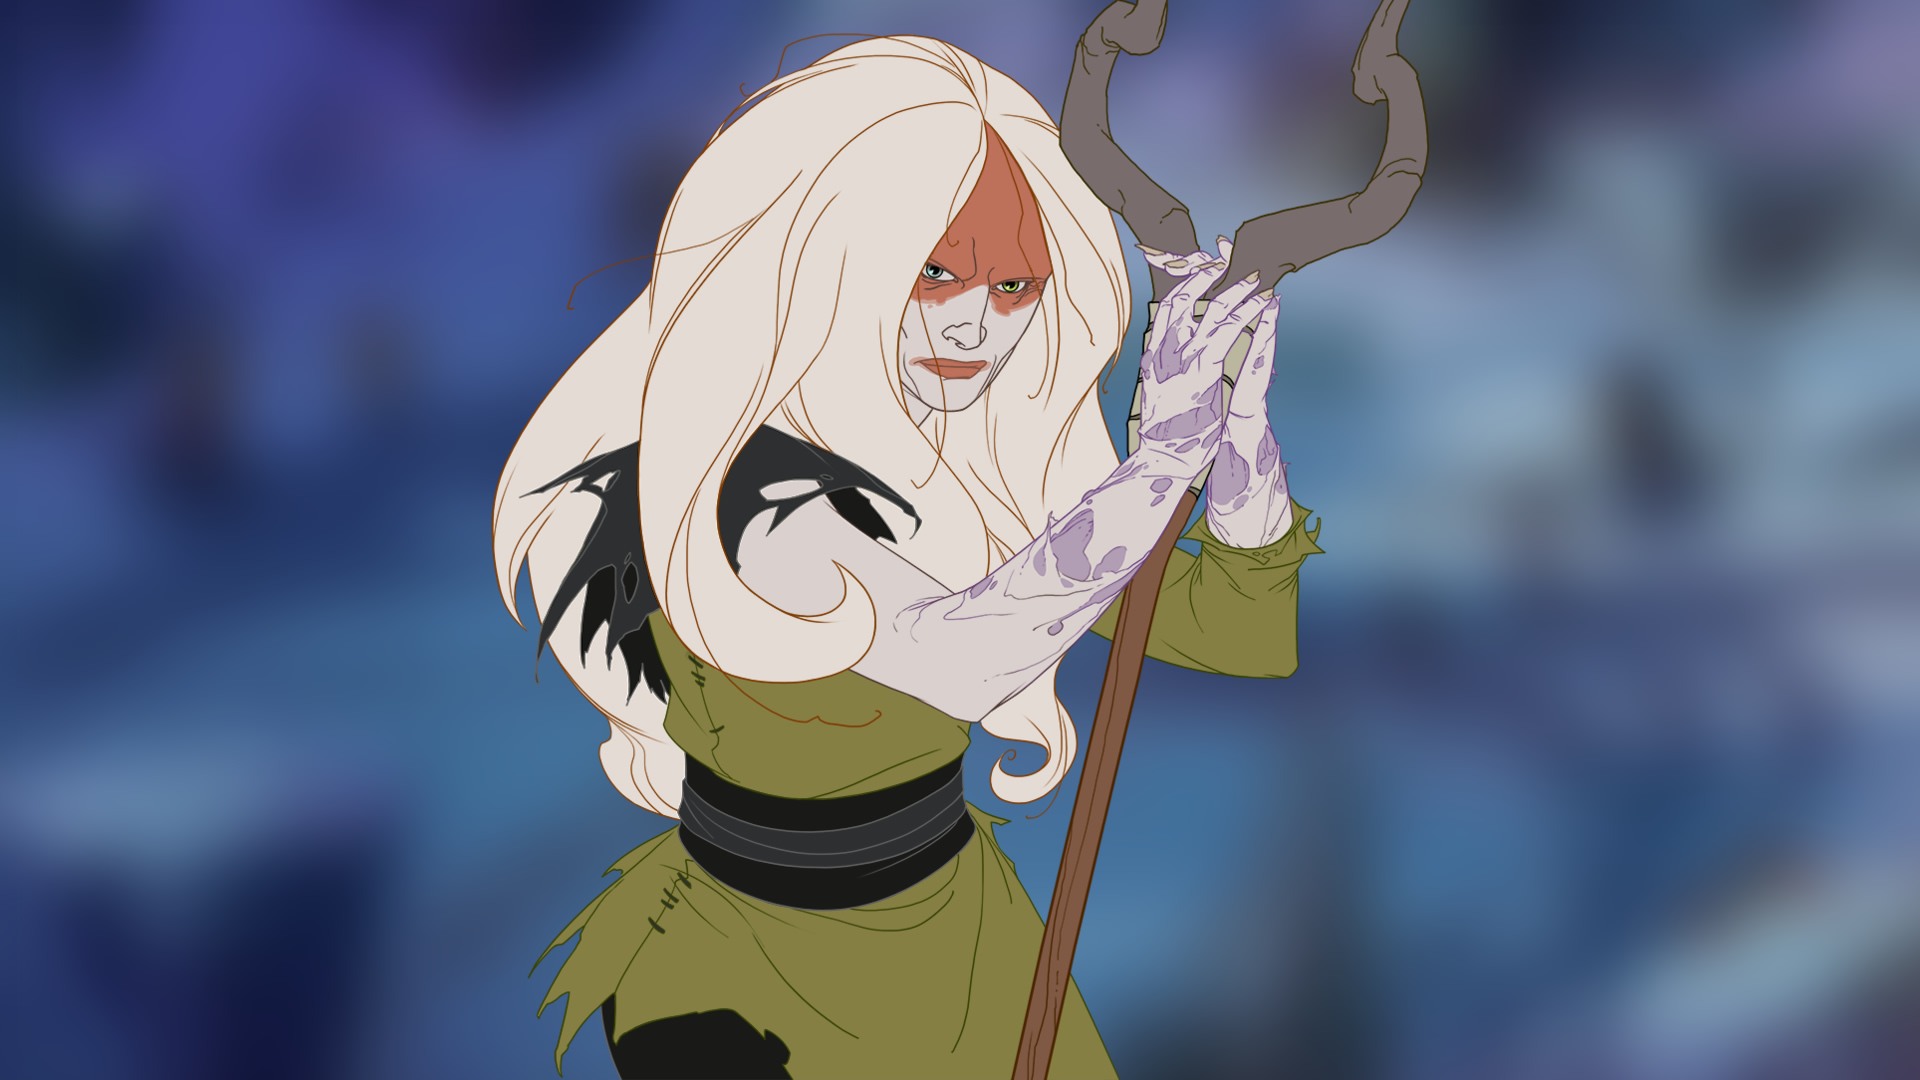 The Banner Saga 3's new healer, Alfrun, stands holding a staff and wears a green tunic